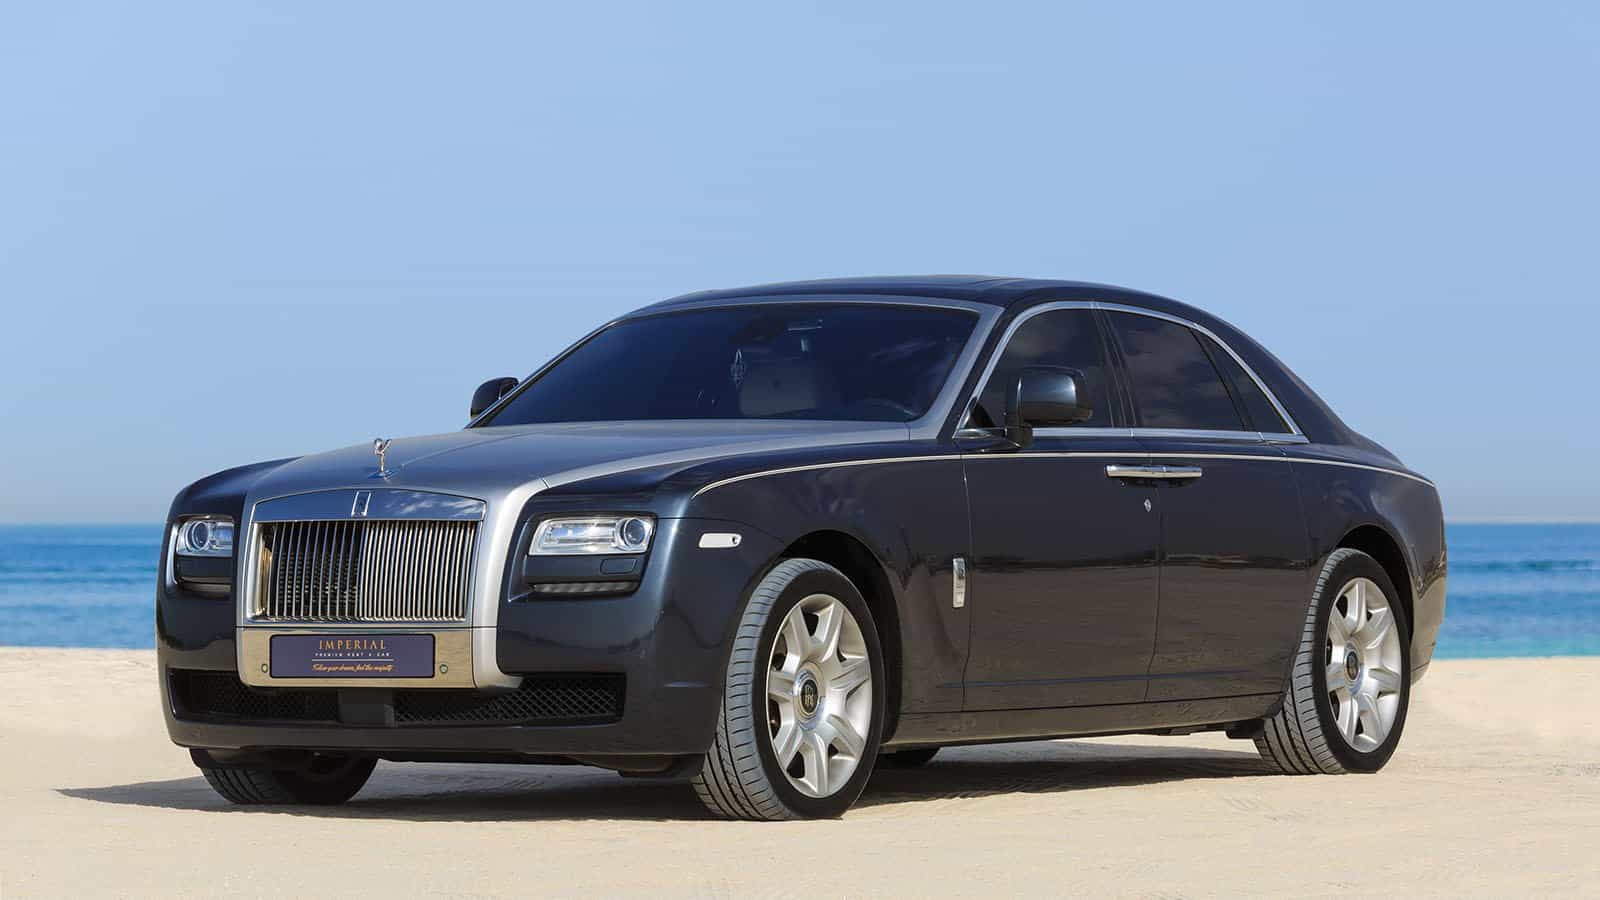 New RollsRoyce Ghost Revealed In Dubai  Tires  Parts News